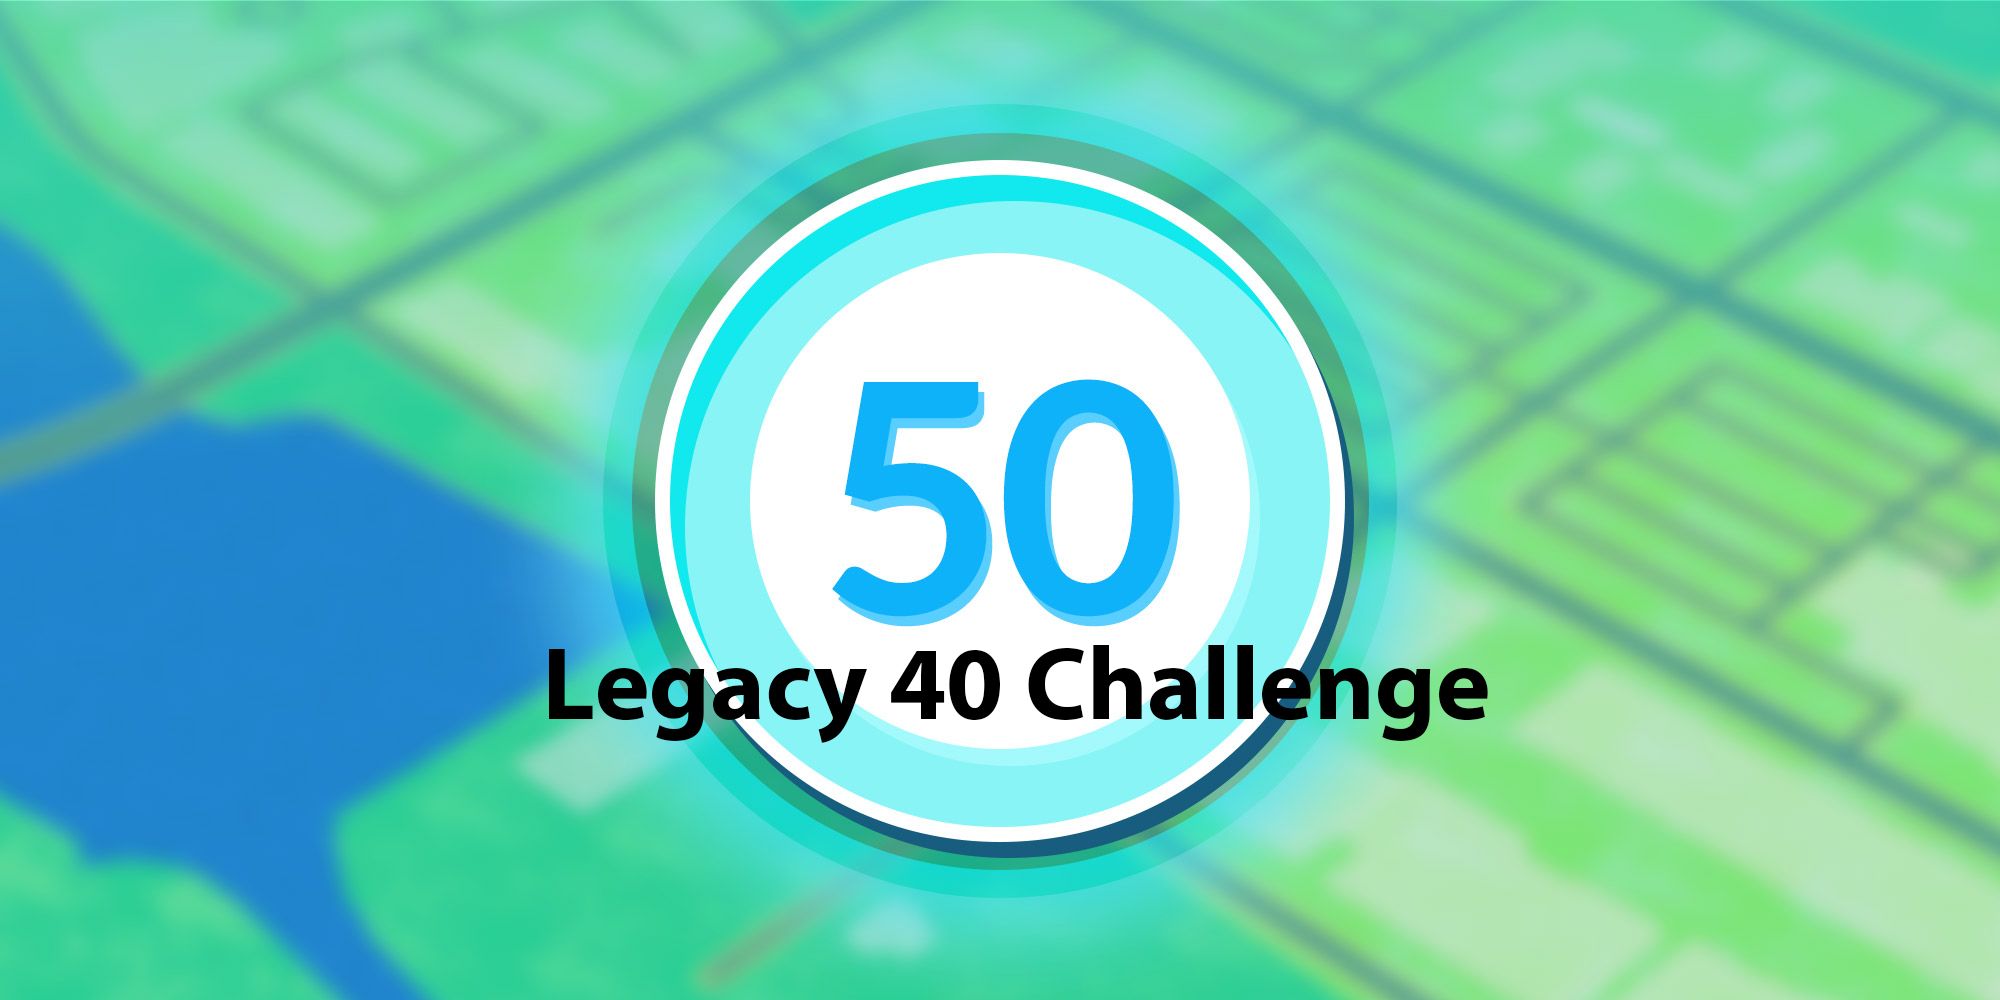 Pokémon GO Every Legacy 40 Challenge Research for December 2020